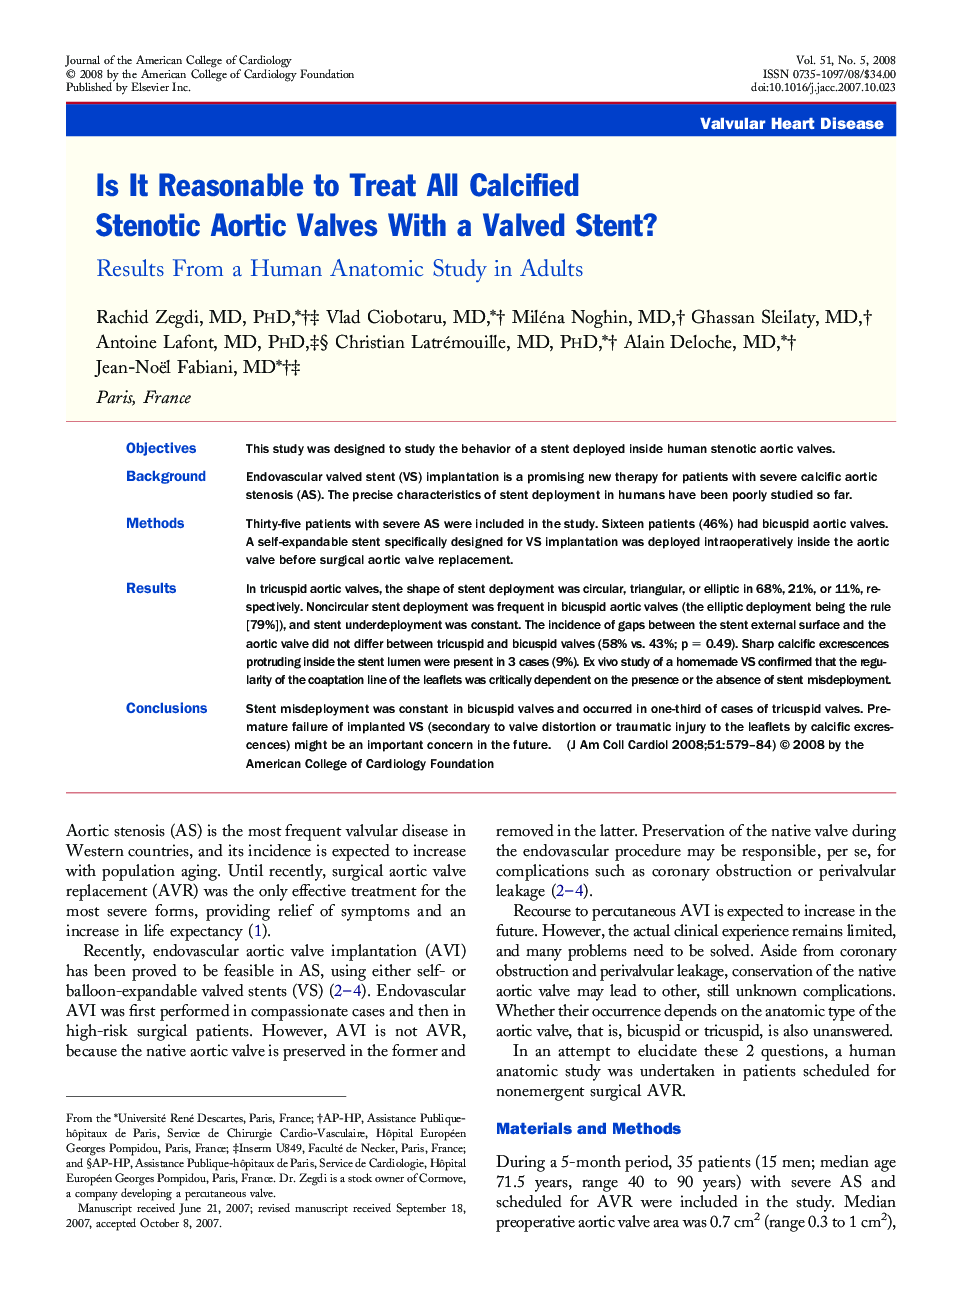 Is It Reasonable to Treat All Calcified Stenotic Aortic Valves With a Valved Stent?: Results From a Human Anatomic Study in Adults